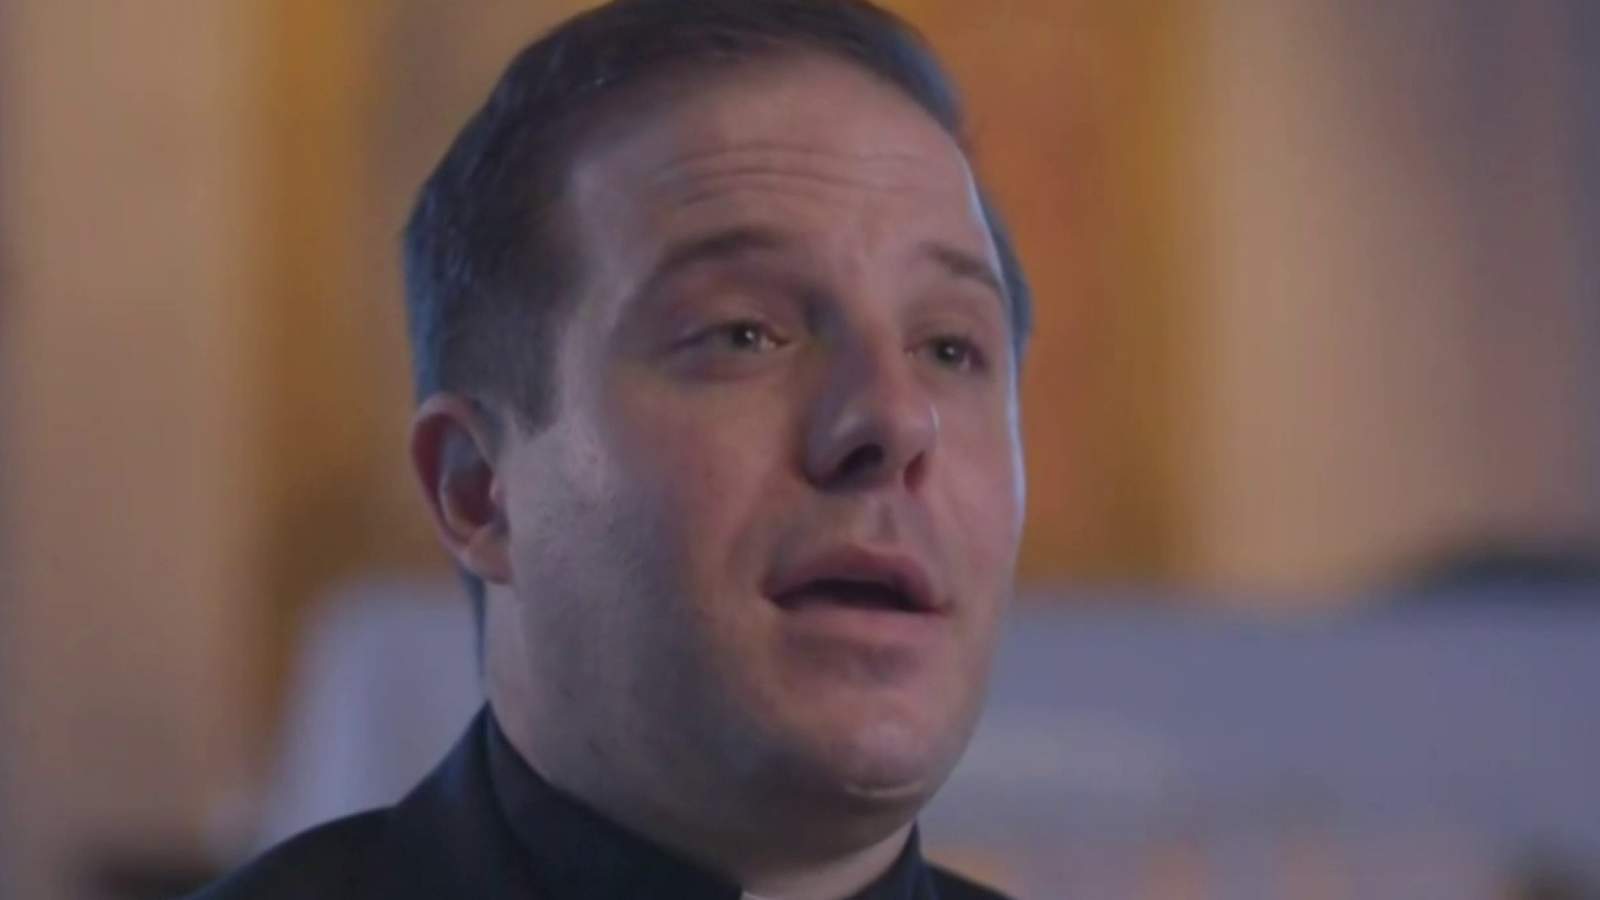 Metro Detroit priests baptism found invalid due to wrong wording